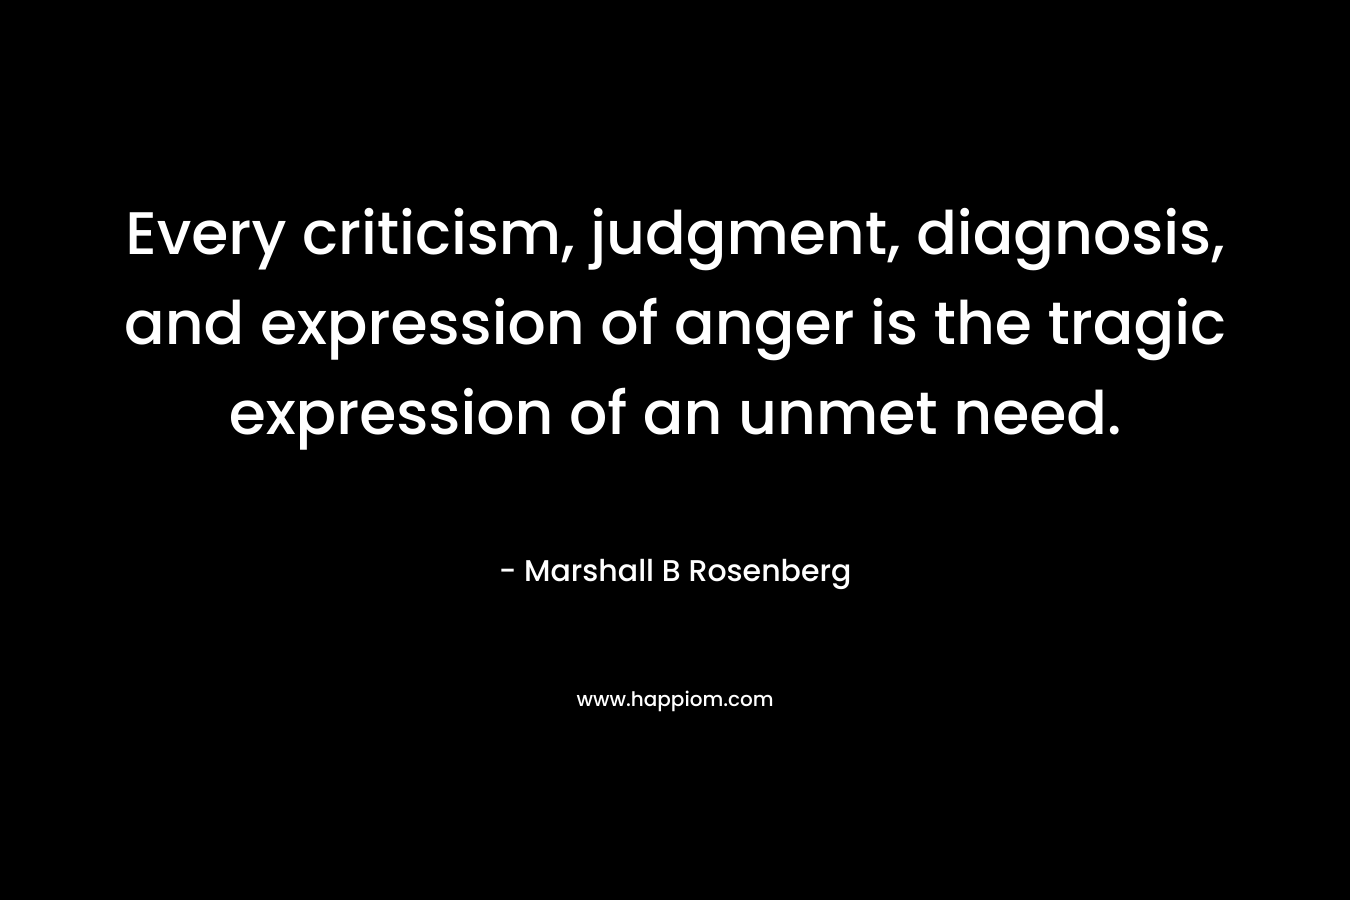 Every criticism, judgment, diagnosis, and expression of anger is the tragic expression of an unmet need.